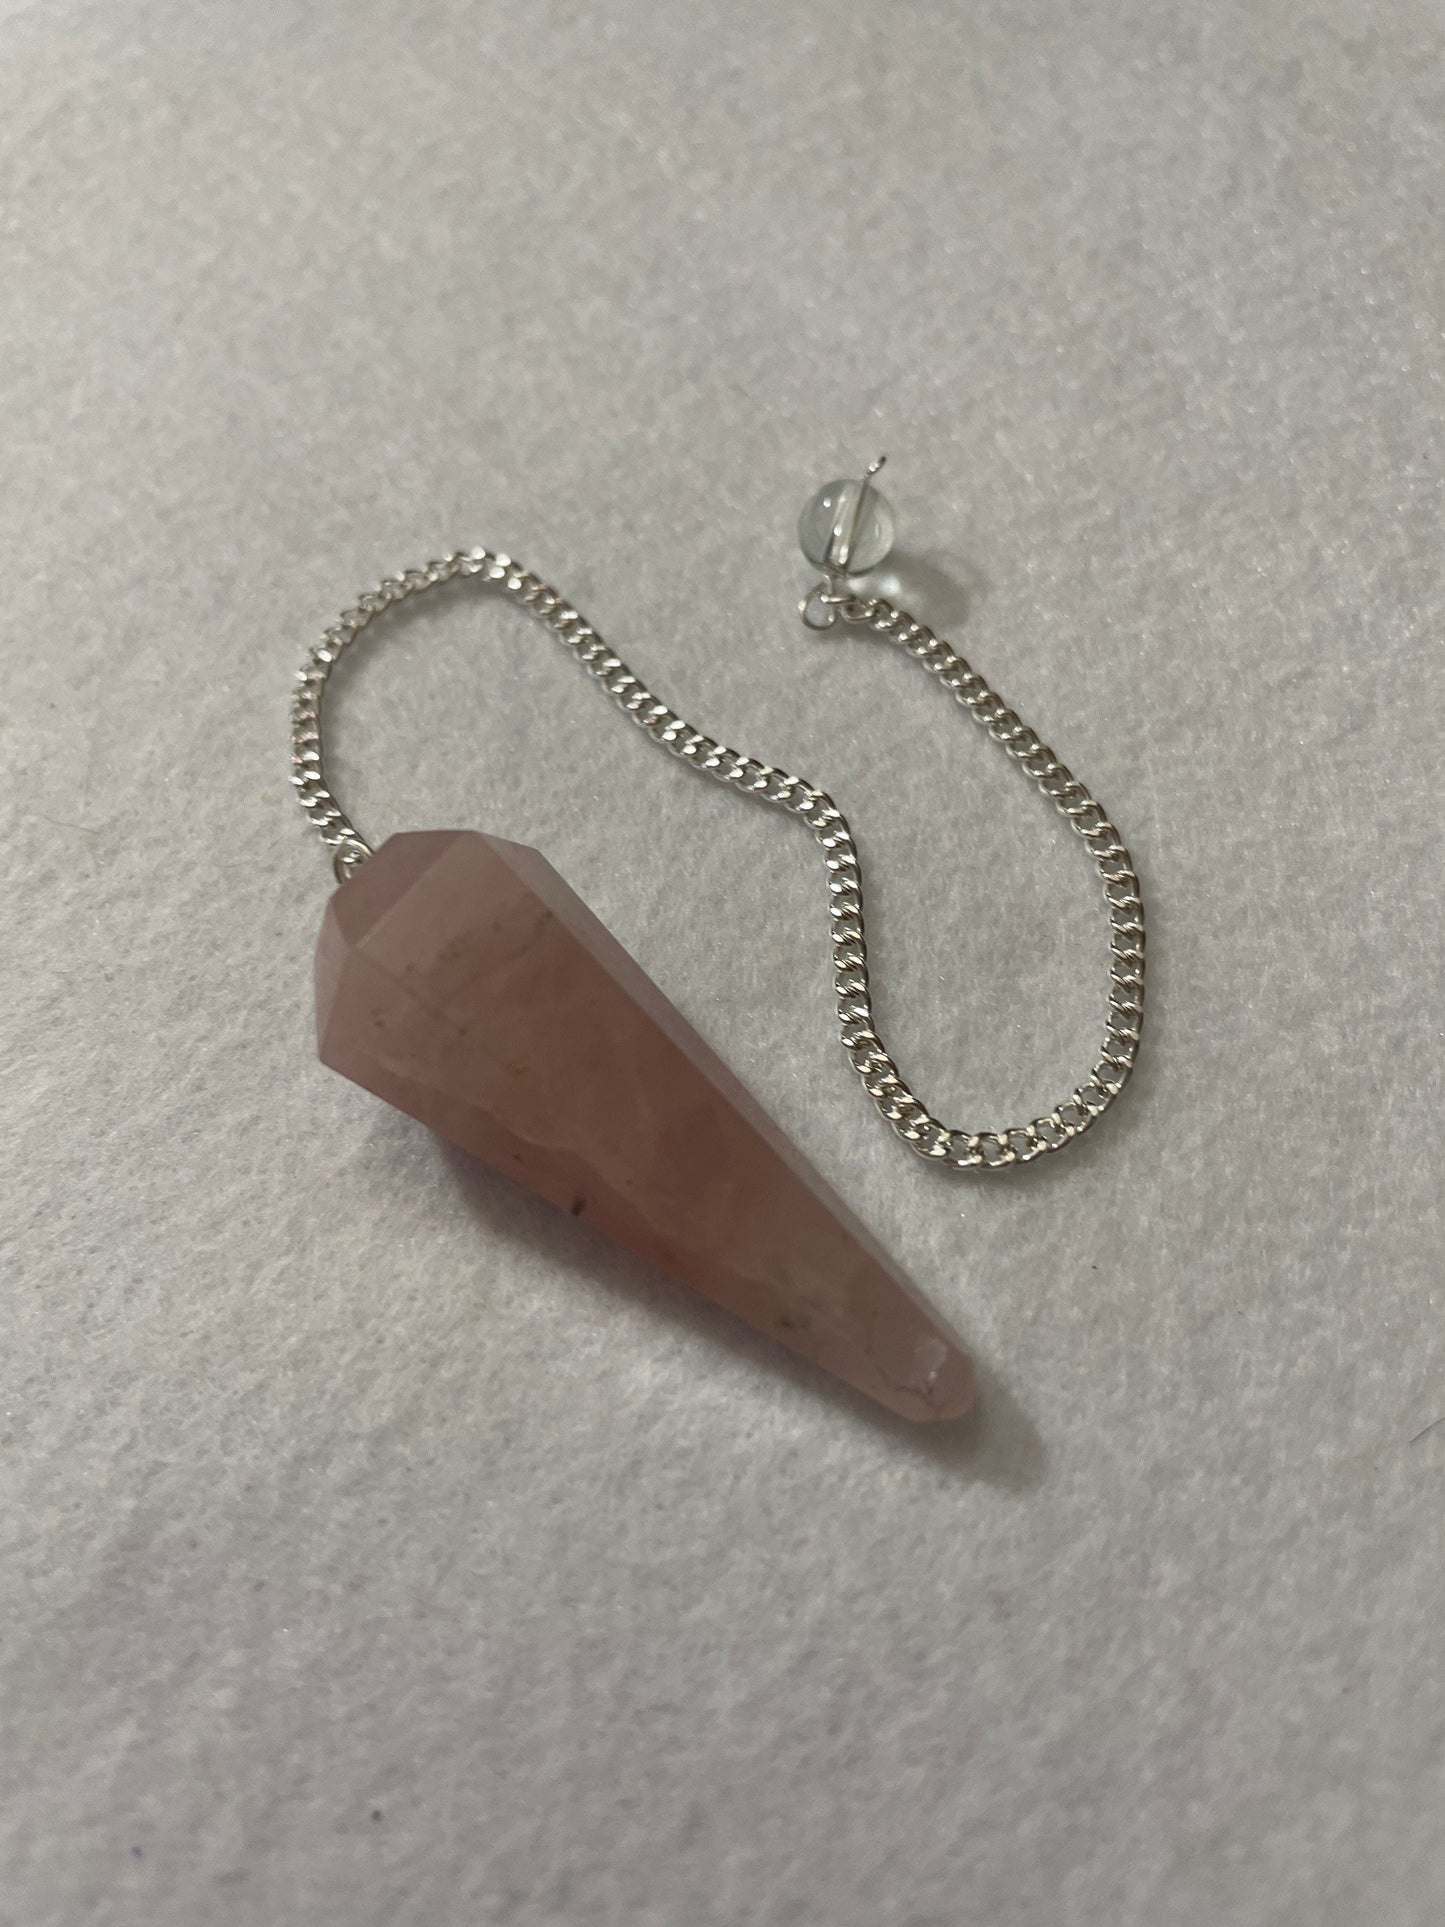 This beautiful Rose Quartz Pendulum is  1.65” and with chain is 8.5”